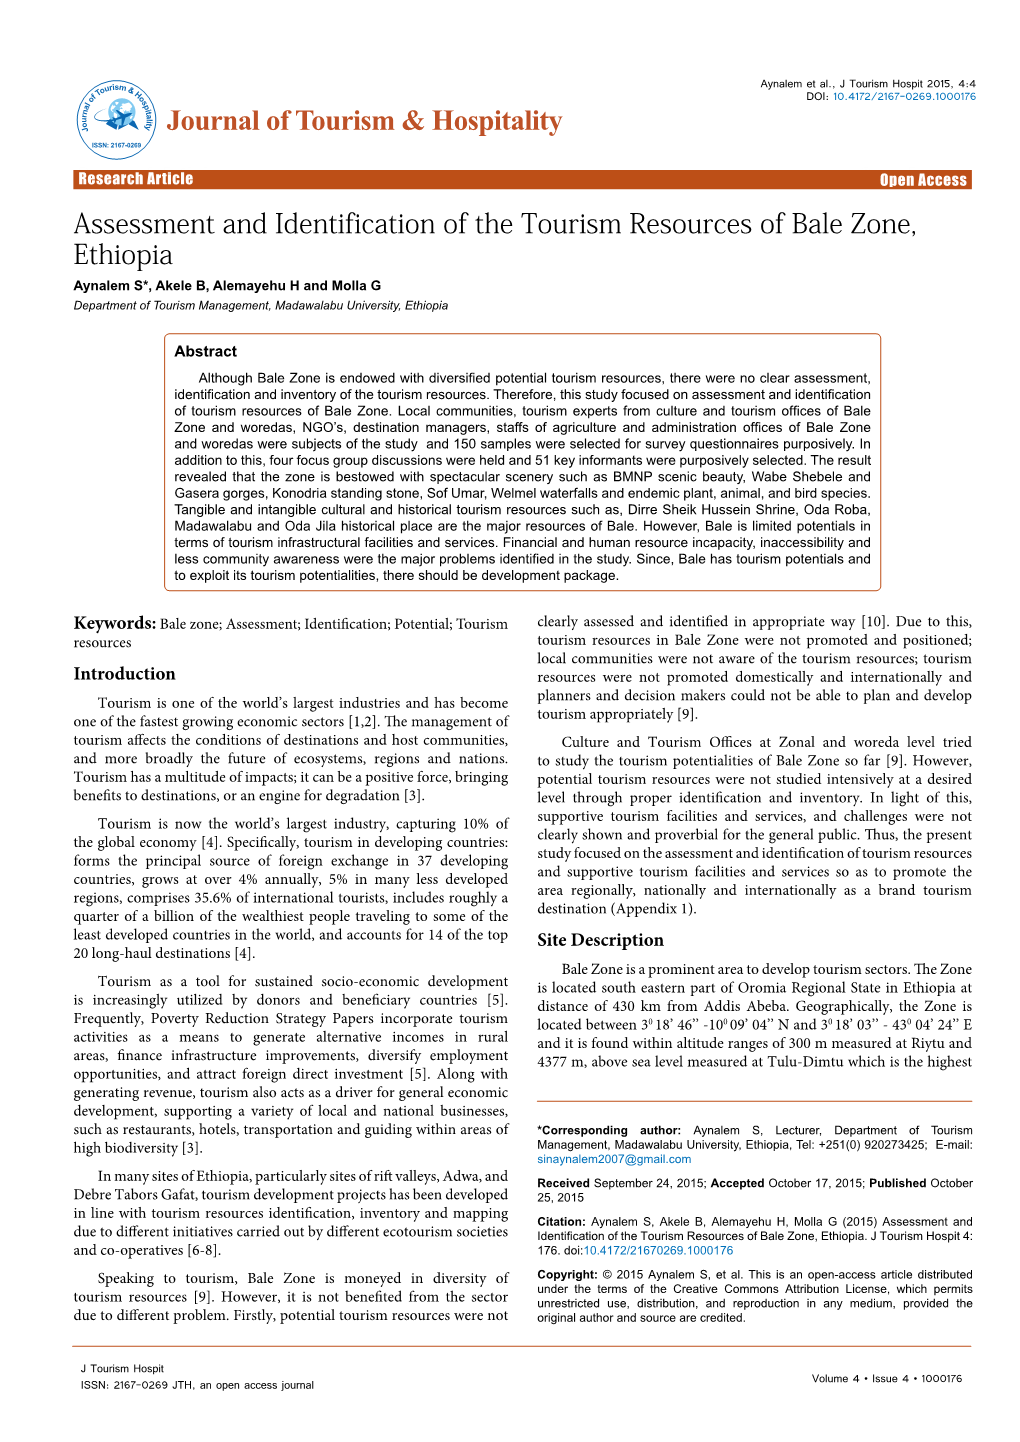 Assessment and Identification of the Tourism Resources of Bale Zone